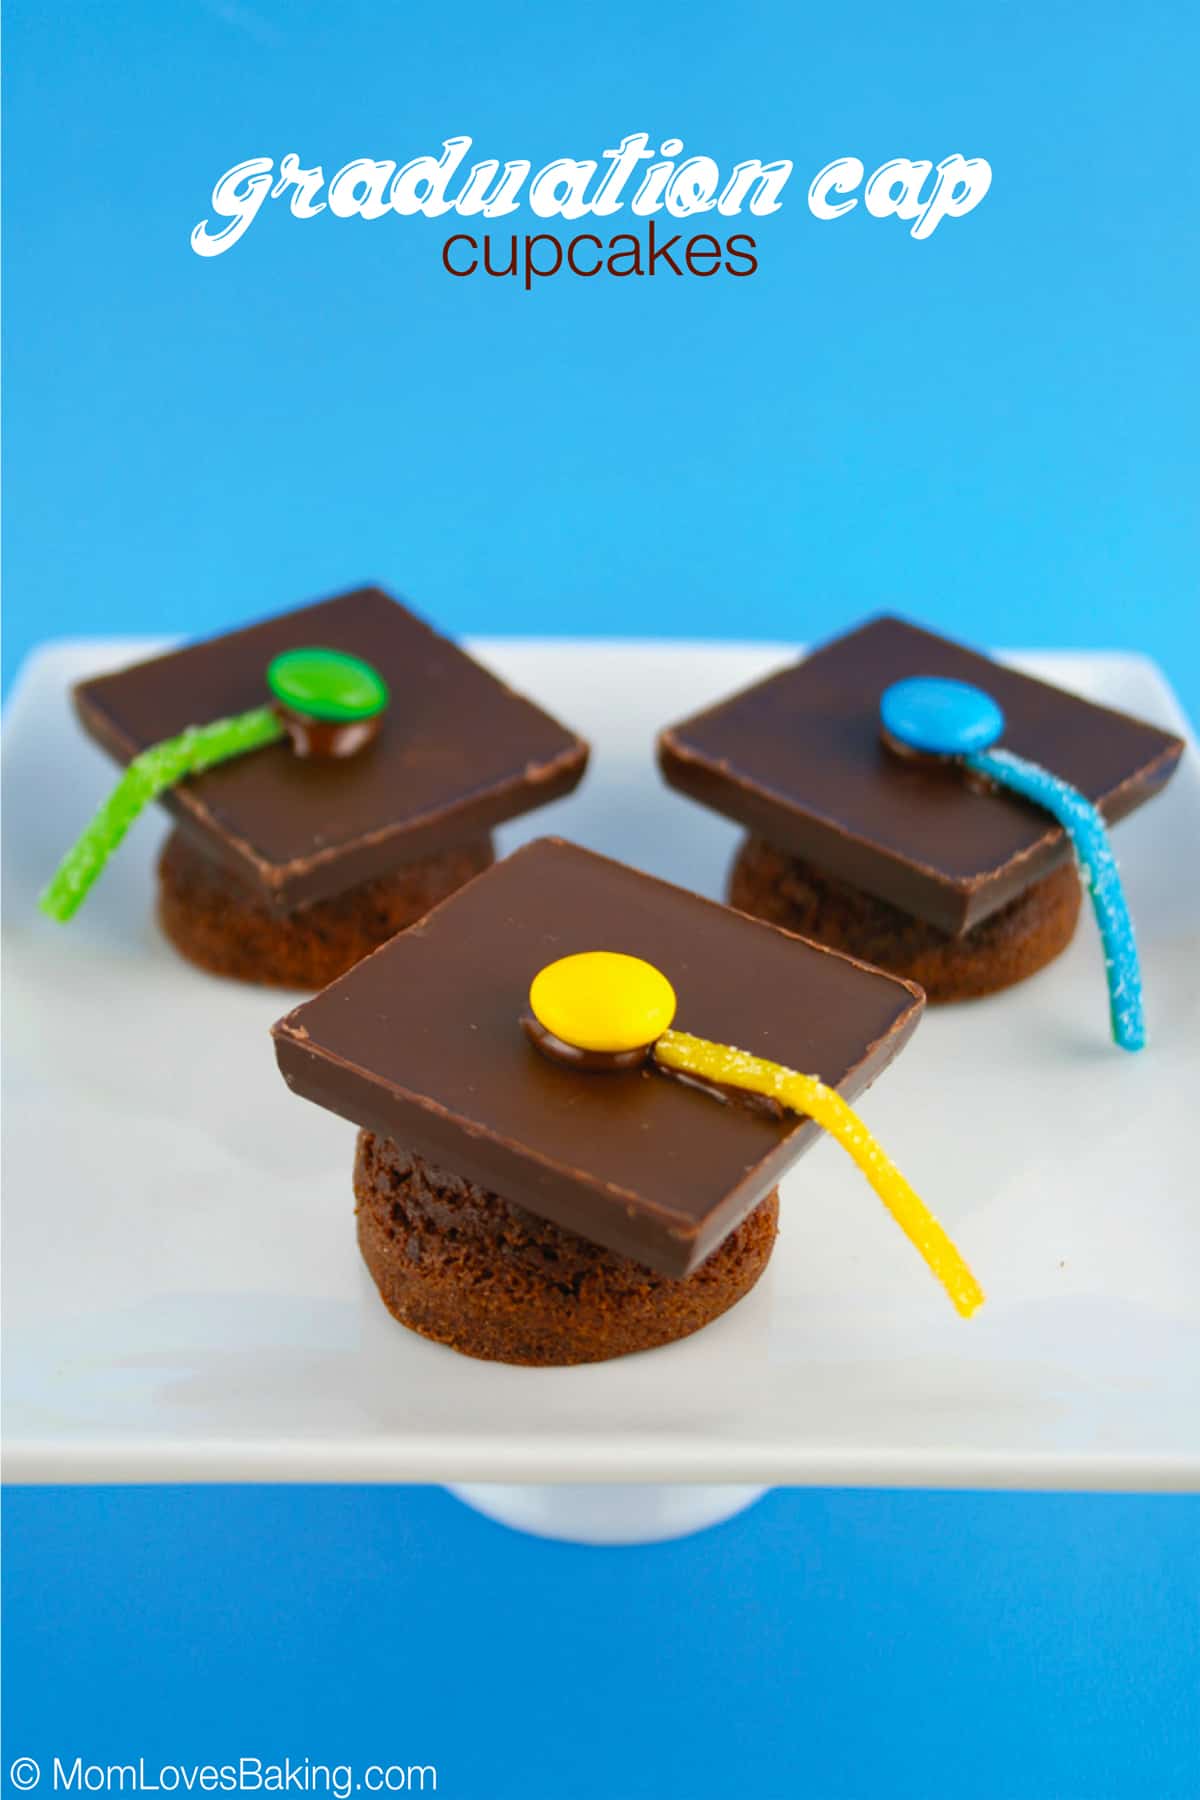 Three brownie bites with chocolate squares to look like graduation caps on a white plate with blue background.